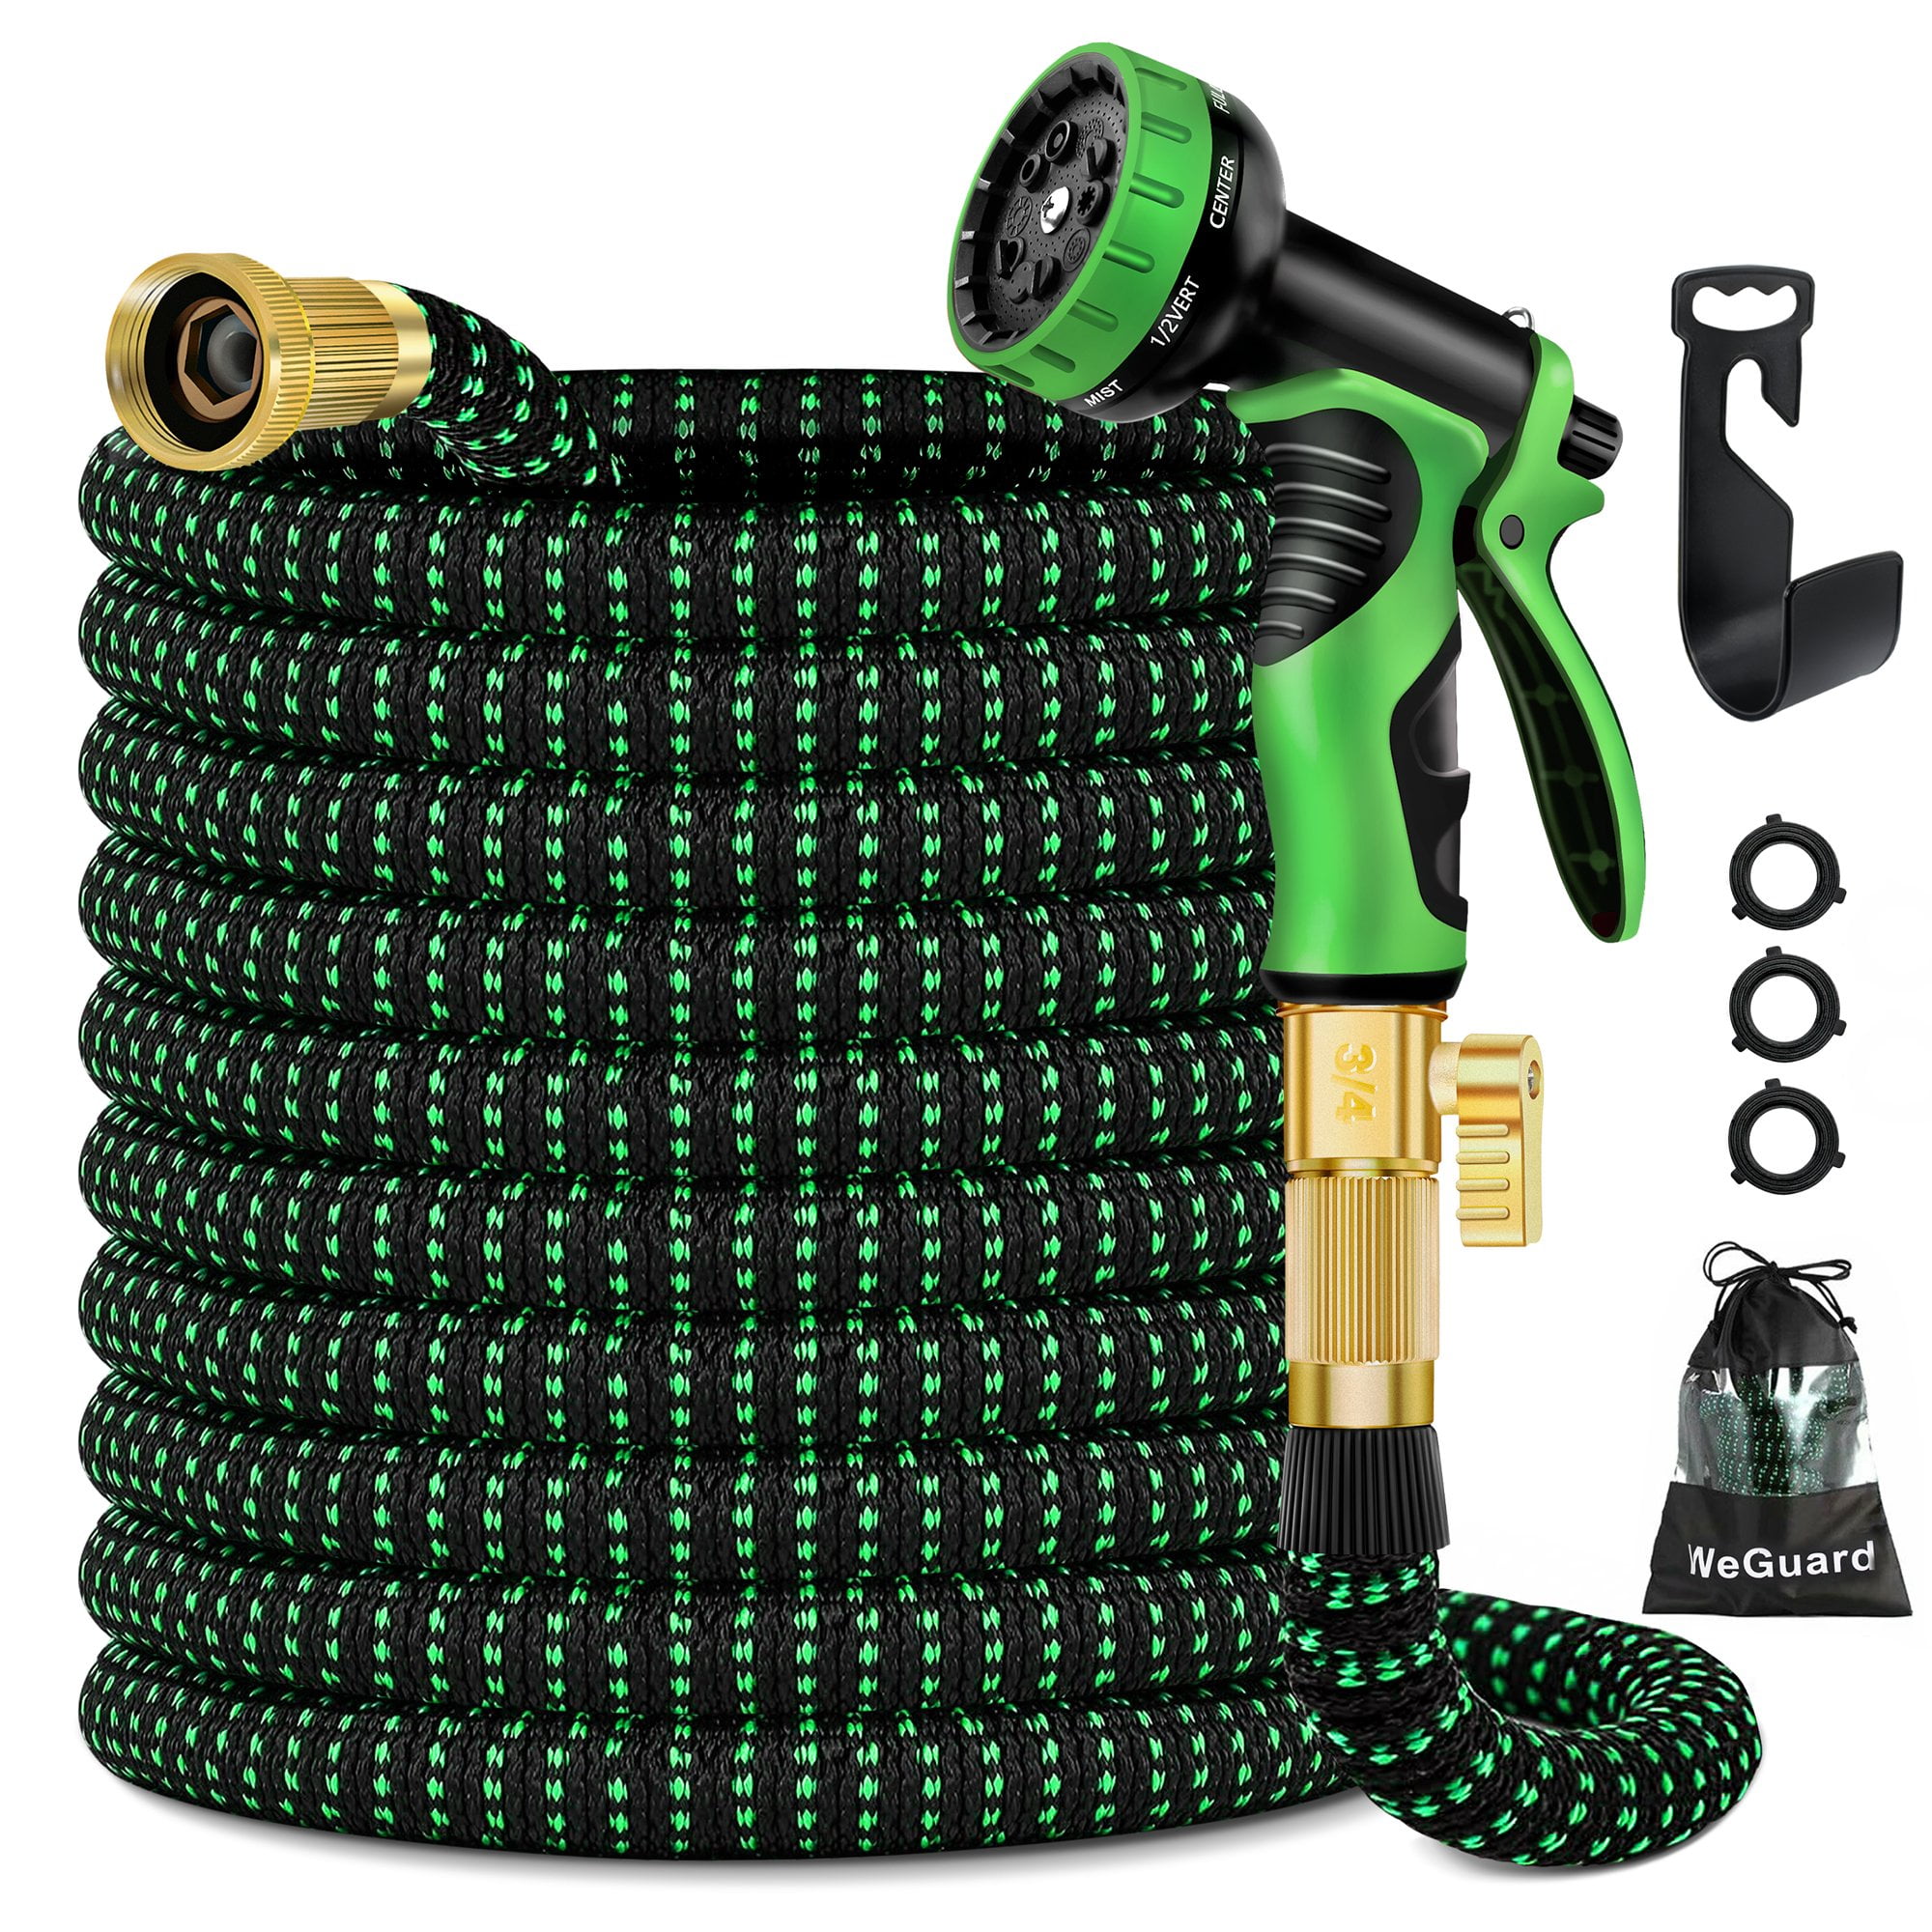 EASYHOSE Garden Hose 25FT/50FT/100FT Expandable Water Hose,Flexible Retractable Hose with 10 Function Spray Nozzle,4 Layer Latex and 3/4'' Solid Brass Fitting for Yard Watering Washing 25FT 